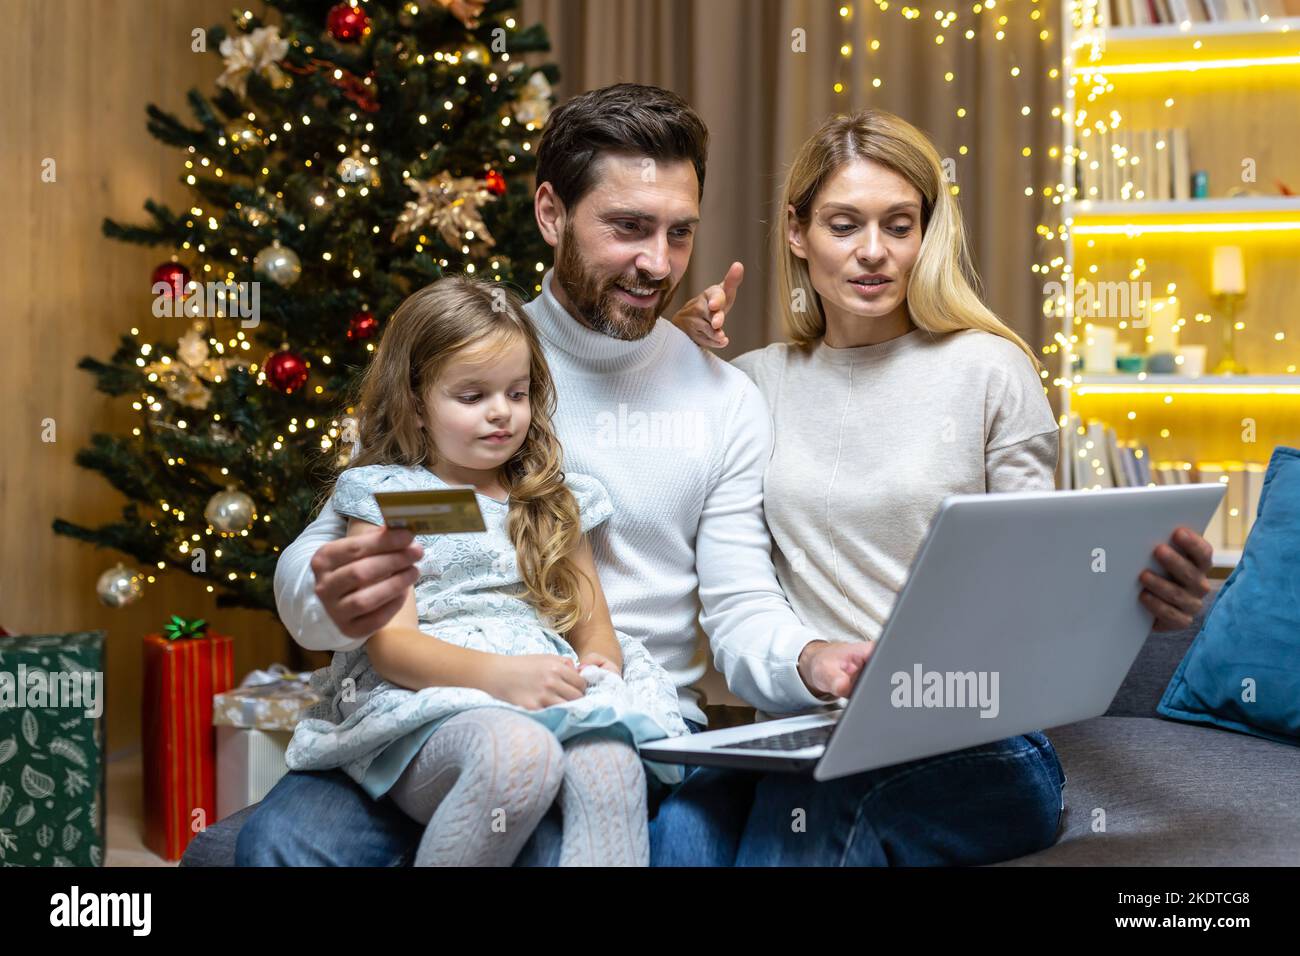 Festive online shopping. A young family, a man, a woman and a child are sitting at home near the Christmas tree. They are holding a laptop and a credit card, choosing Christmas gifts online. Stock Photo